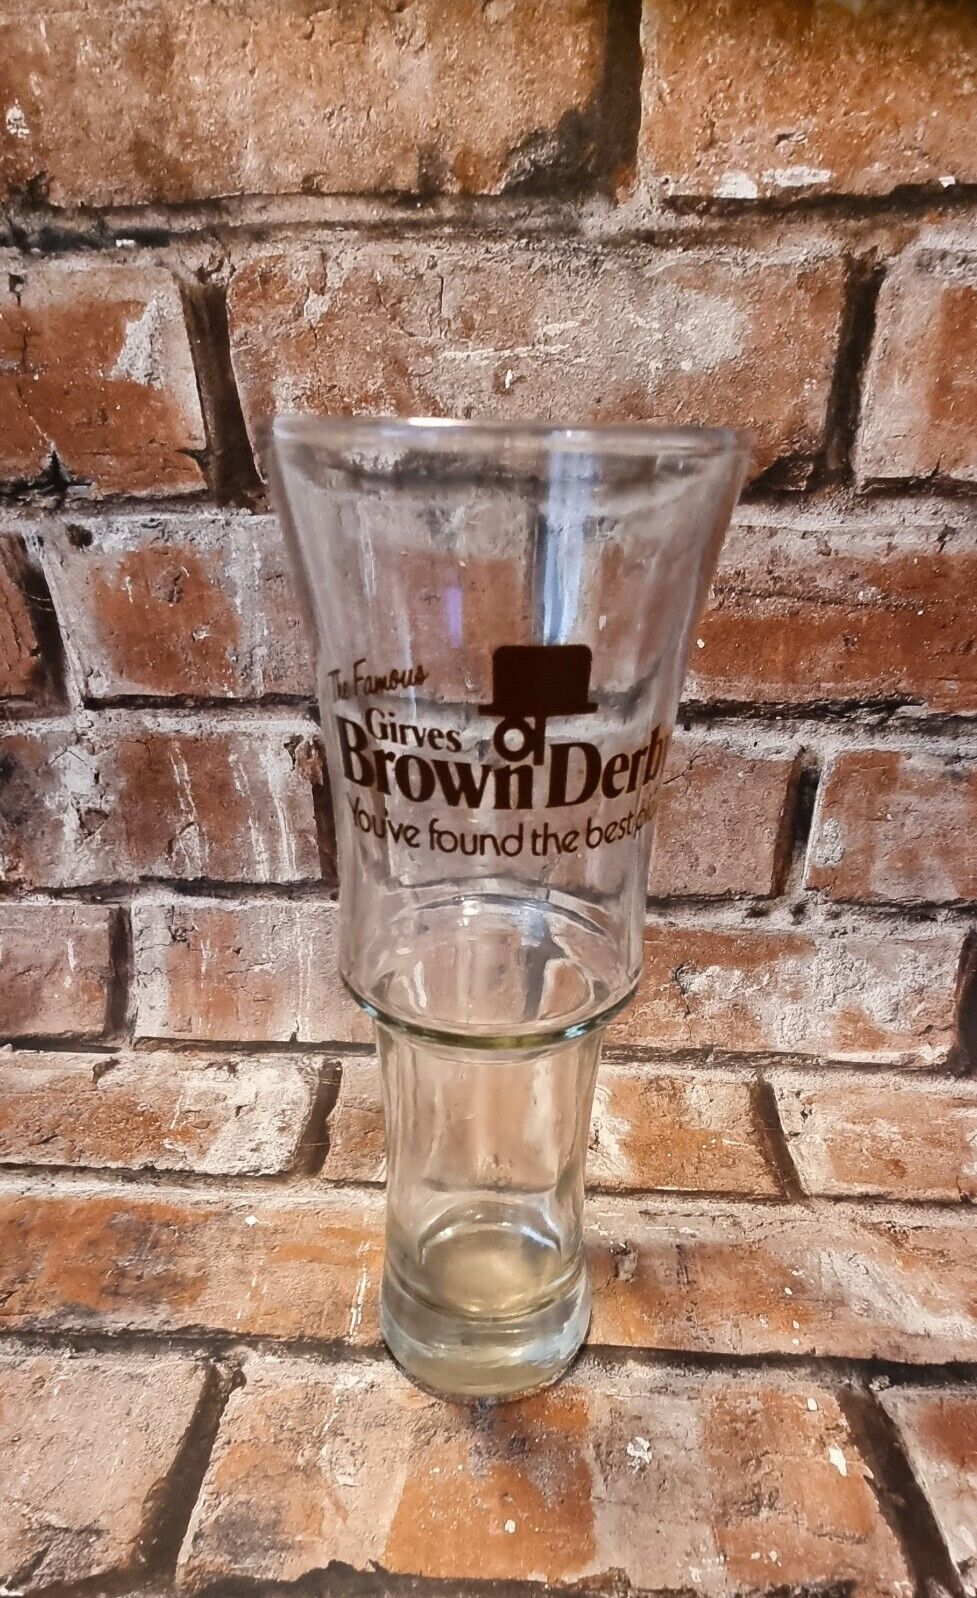 THE FAMOUS GIRVES OF BROWN DERBY TALL PINT VINTAGE BEER GLASS RARE AUTHENTIC